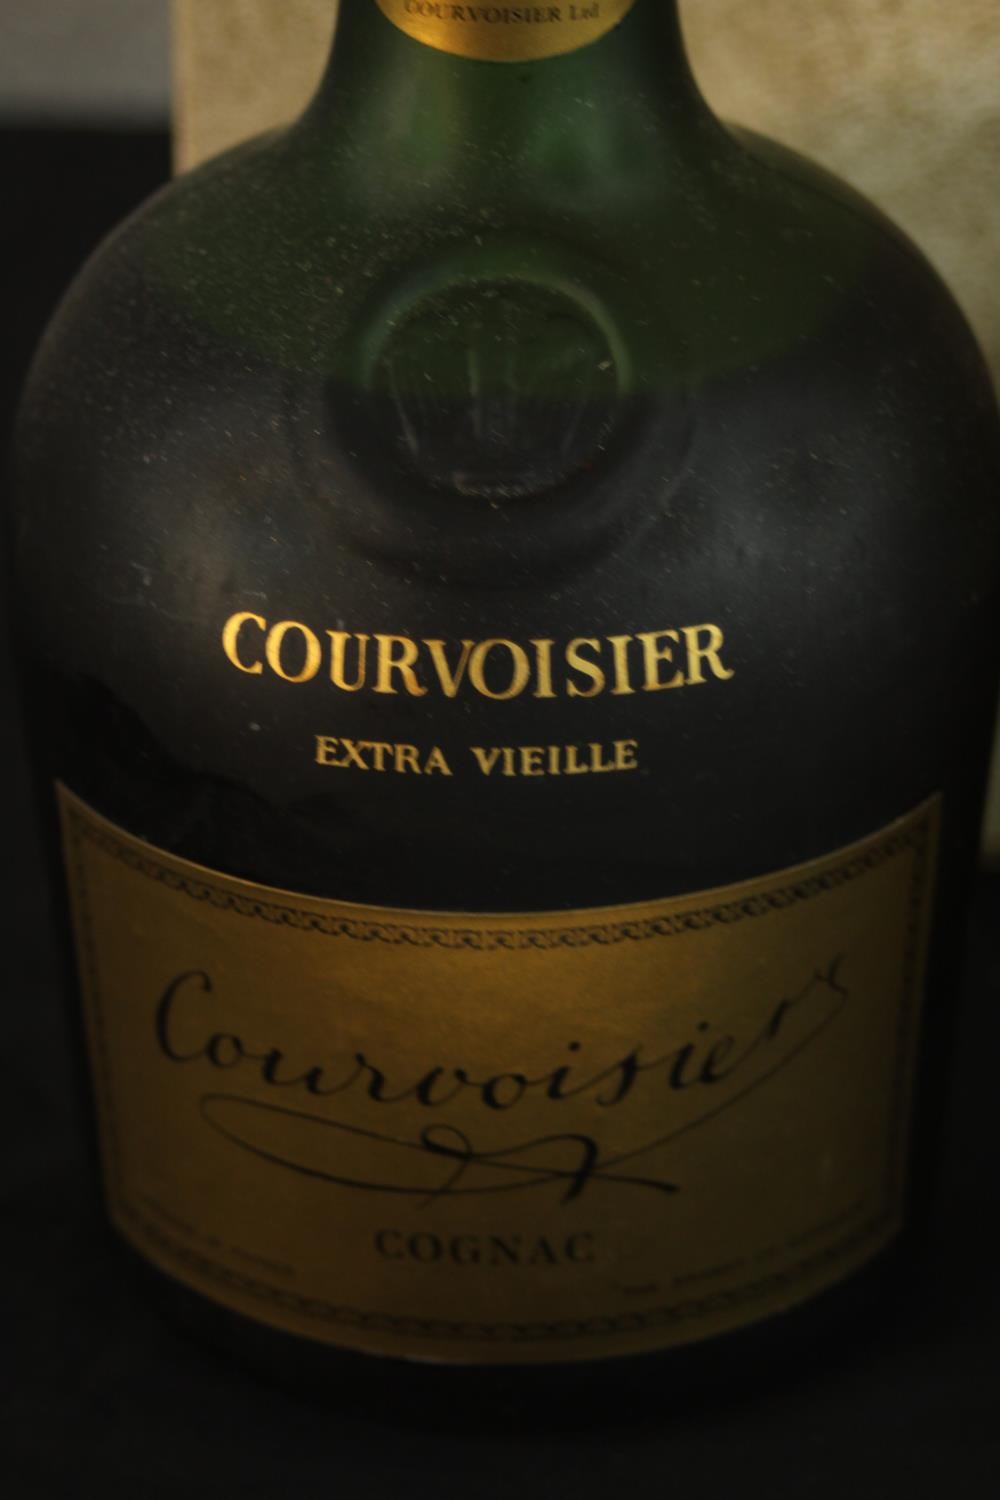 Four bottles of boxed spirits and champagne, including a bottle of Courvoisier Extra Vieille cognac, - Image 7 of 7